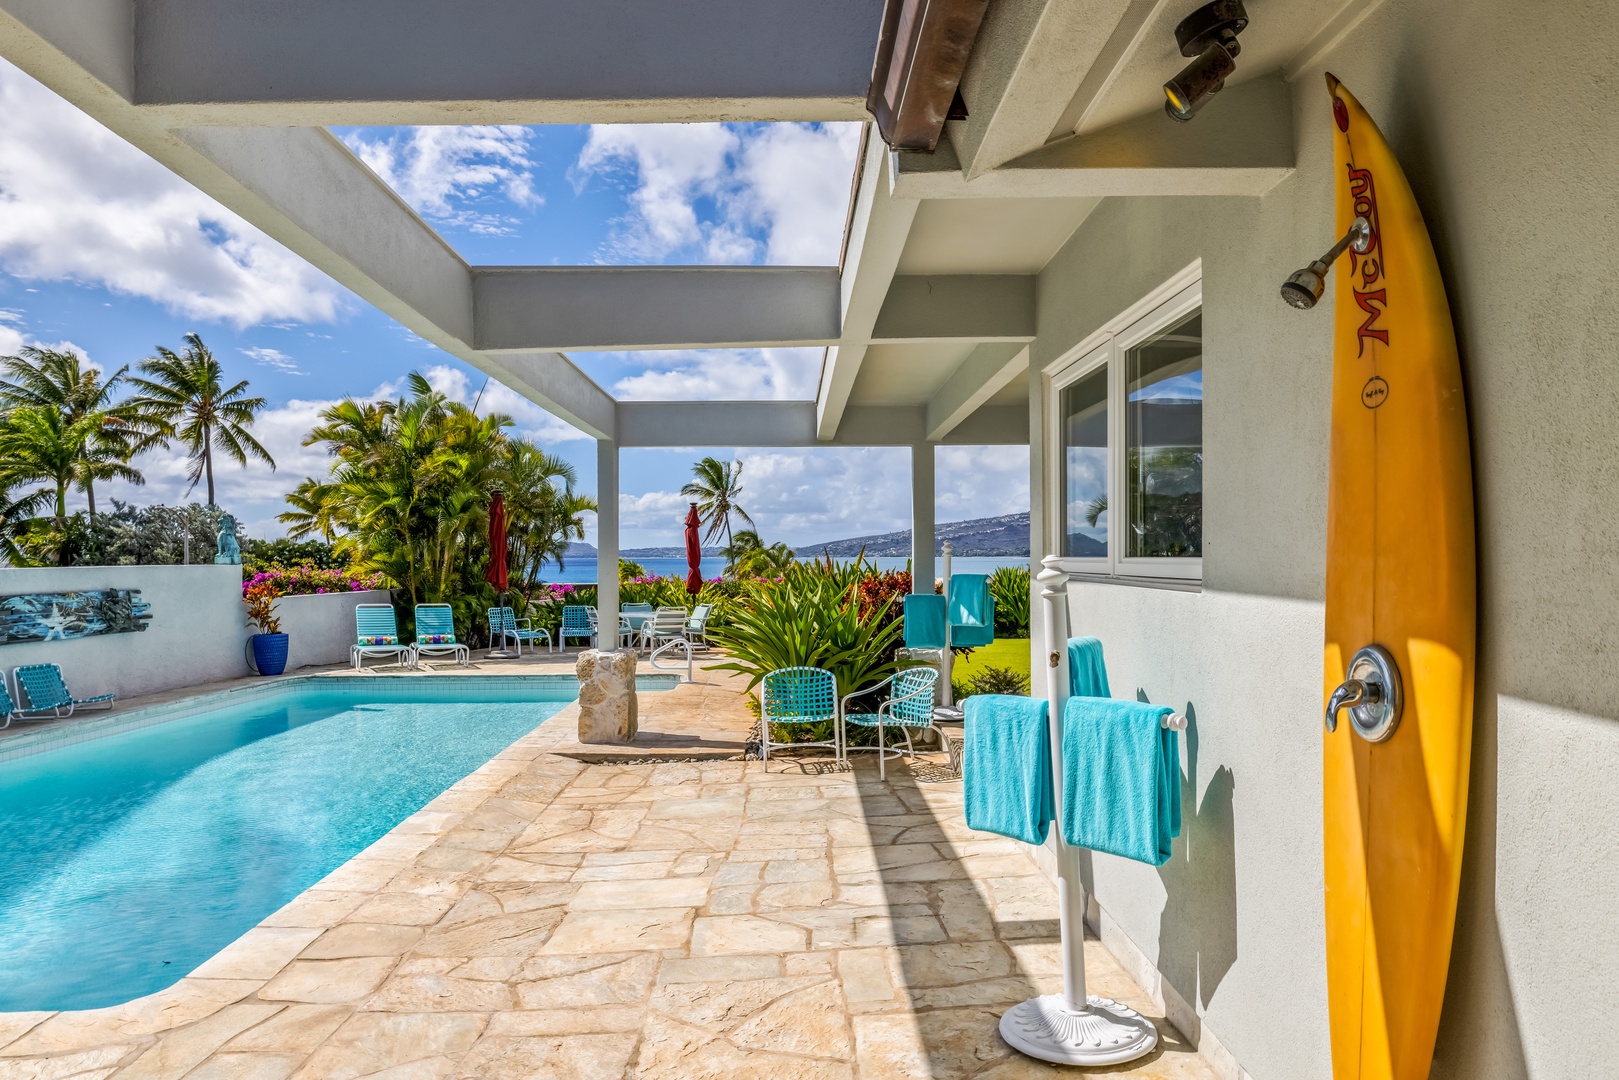 Honolulu Vacation Rentals, Hale Ola - The solar-heated saltwater swimming pool and outdoor shower are just steps away, inviting you to bask in the Hawaiian sun